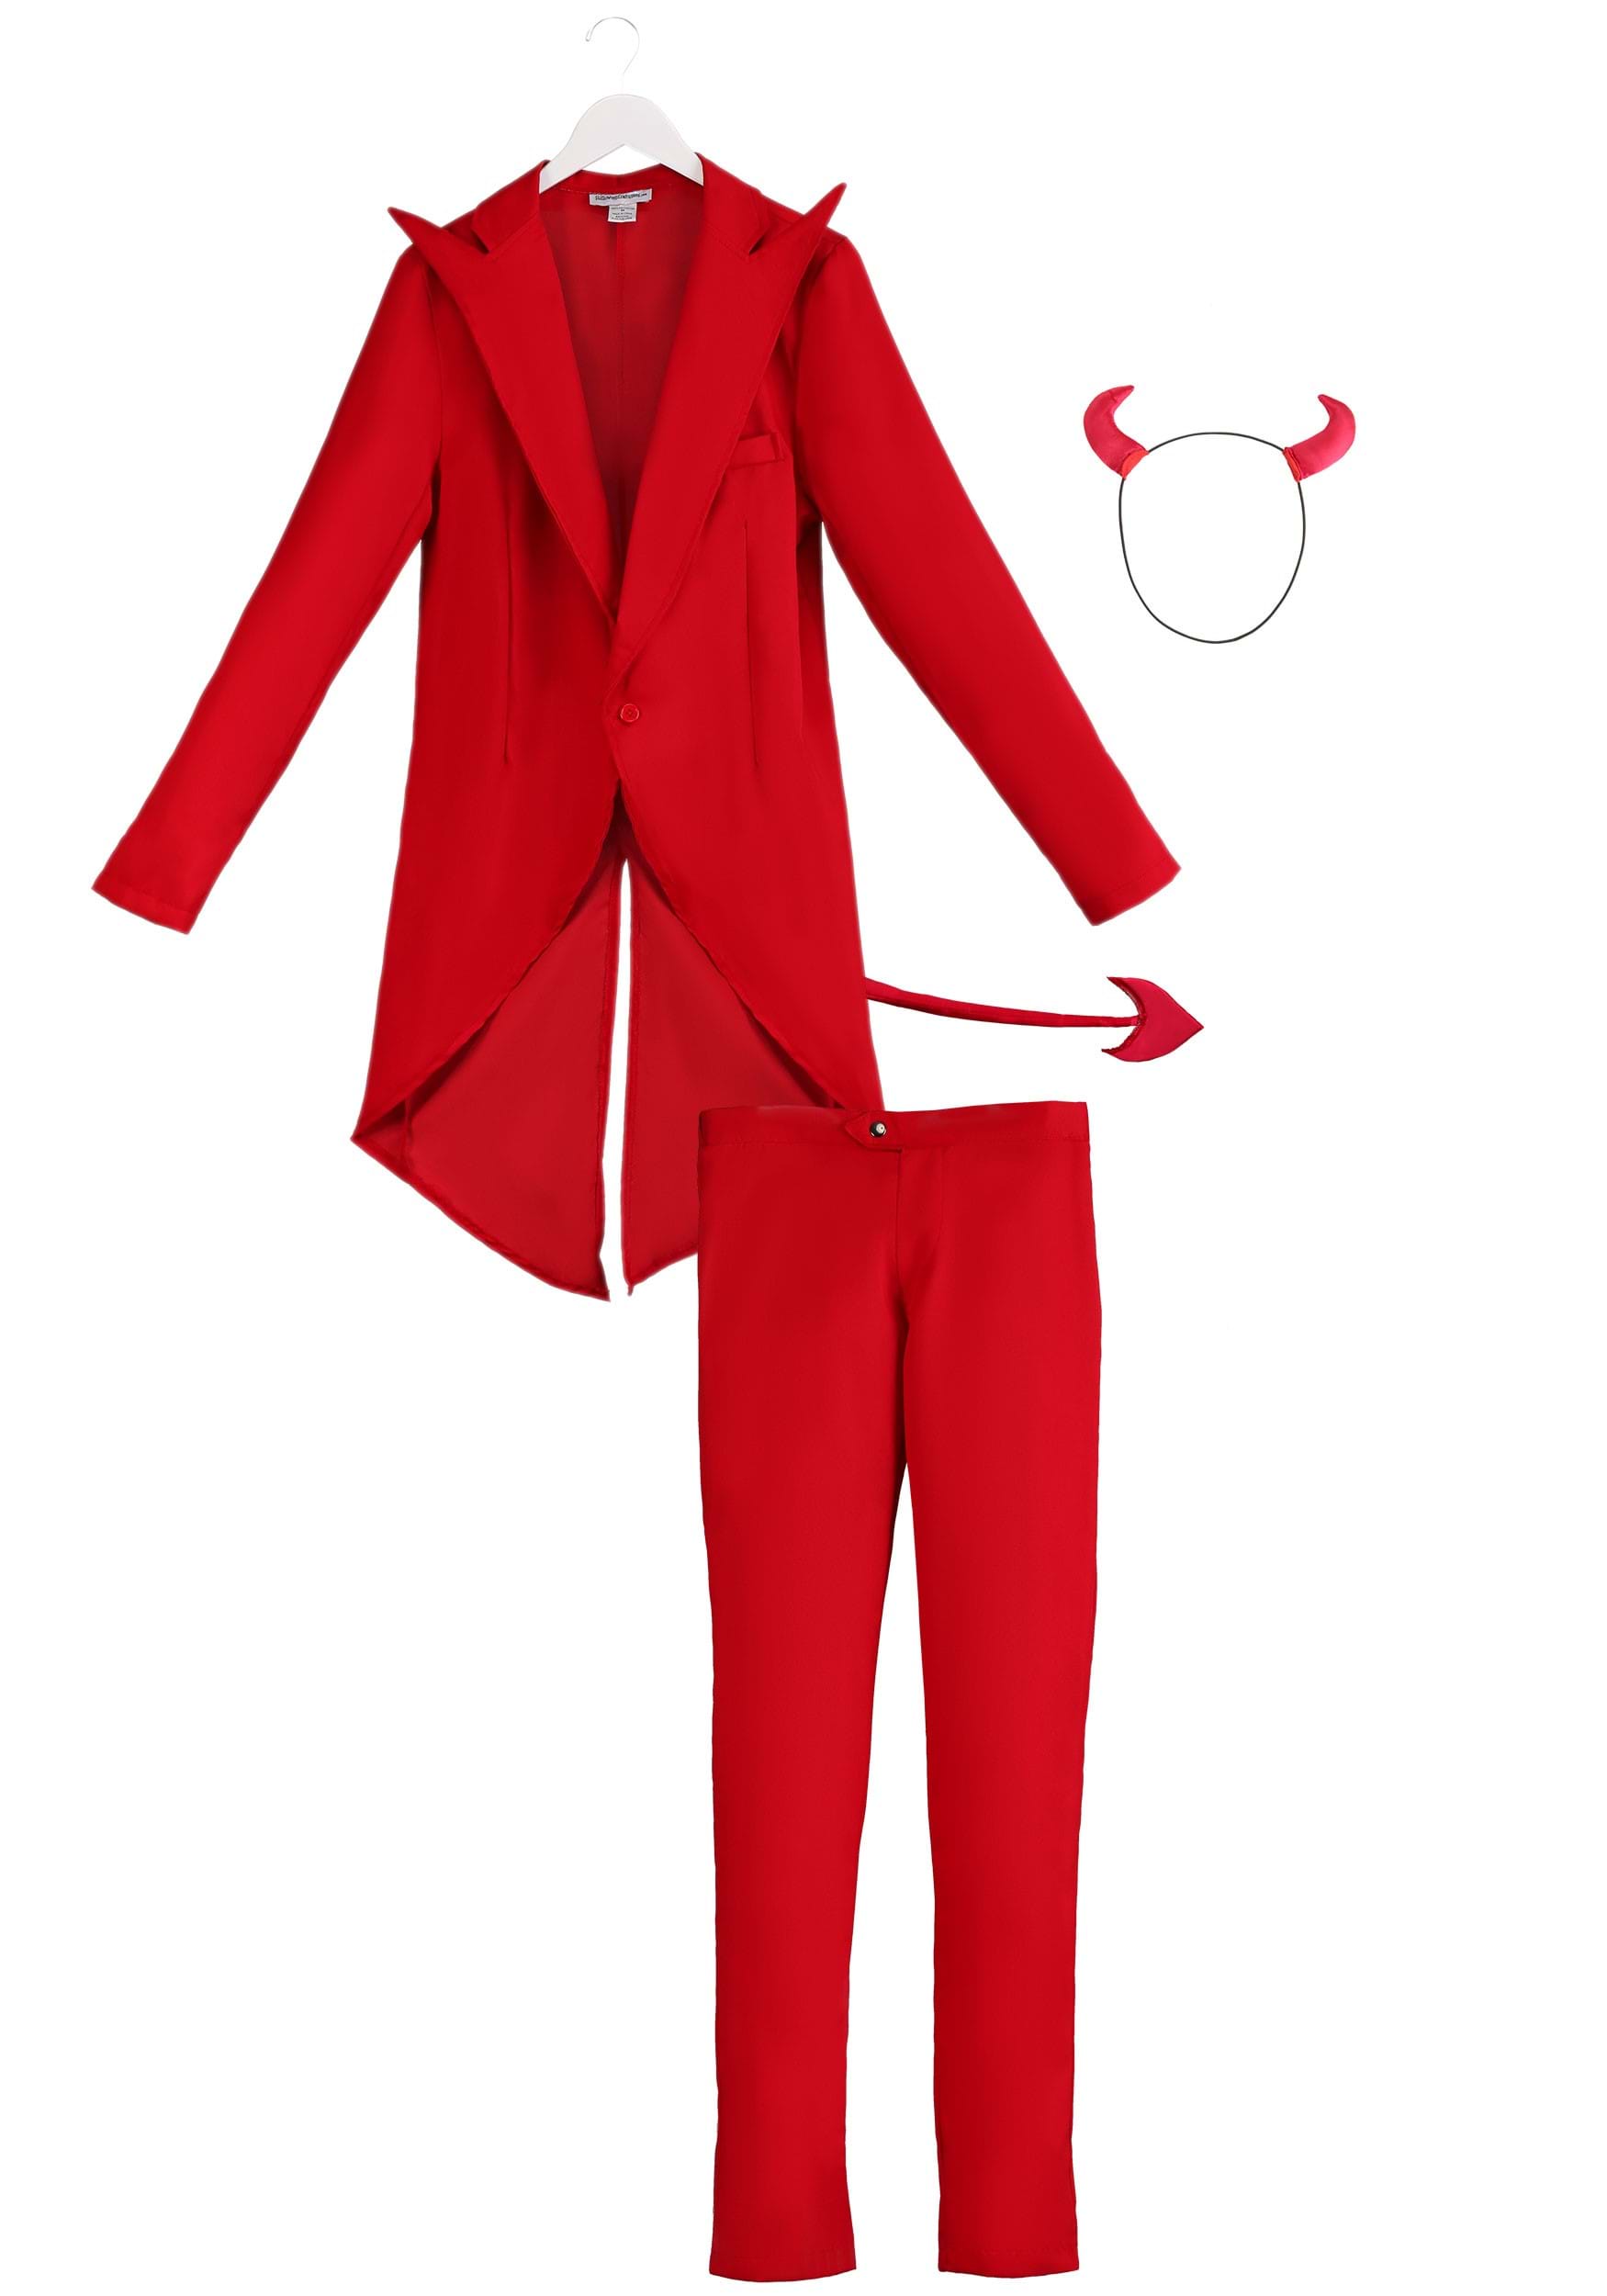 Photos - Fancy Dress FUN Costumes Red Suit Devil Costume for Men Red FUN2344AD